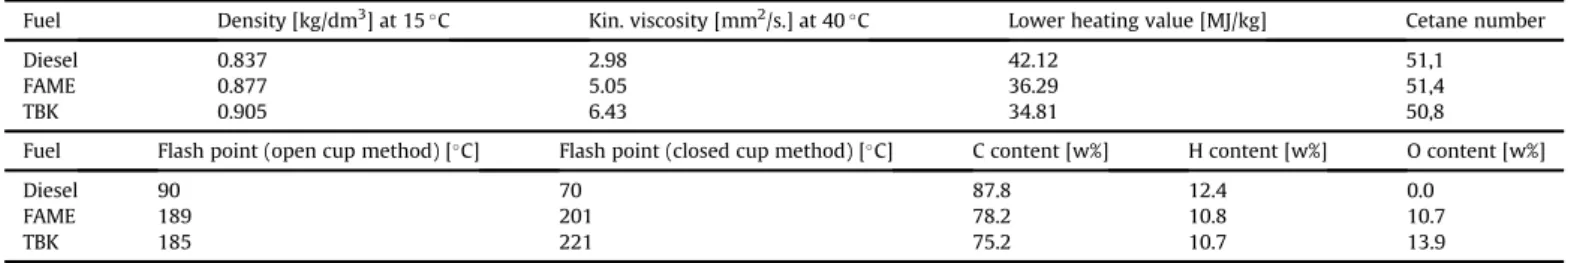 Table 1 summarizes the most important physicochemical properties of the tested fuels. Measurements have been carried out according to the related standards